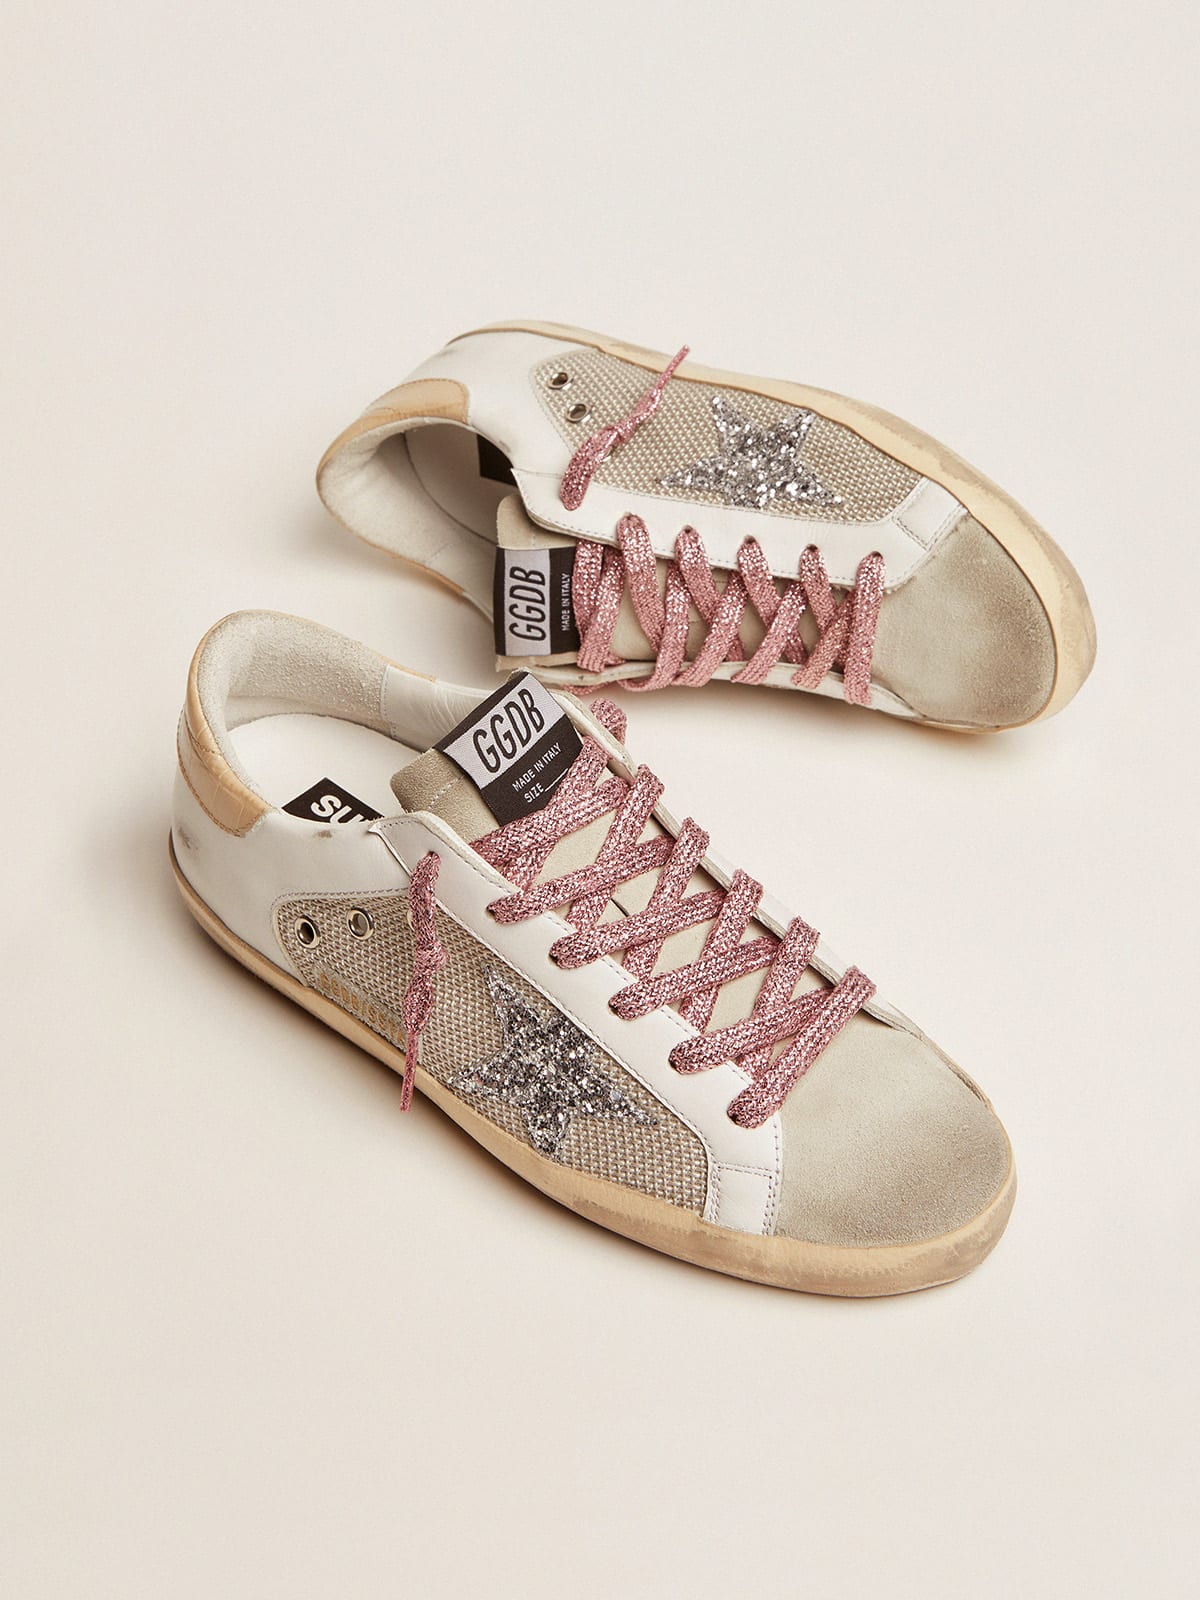 Super-Star sneakers in white leather and silver mesh | Golden Goose